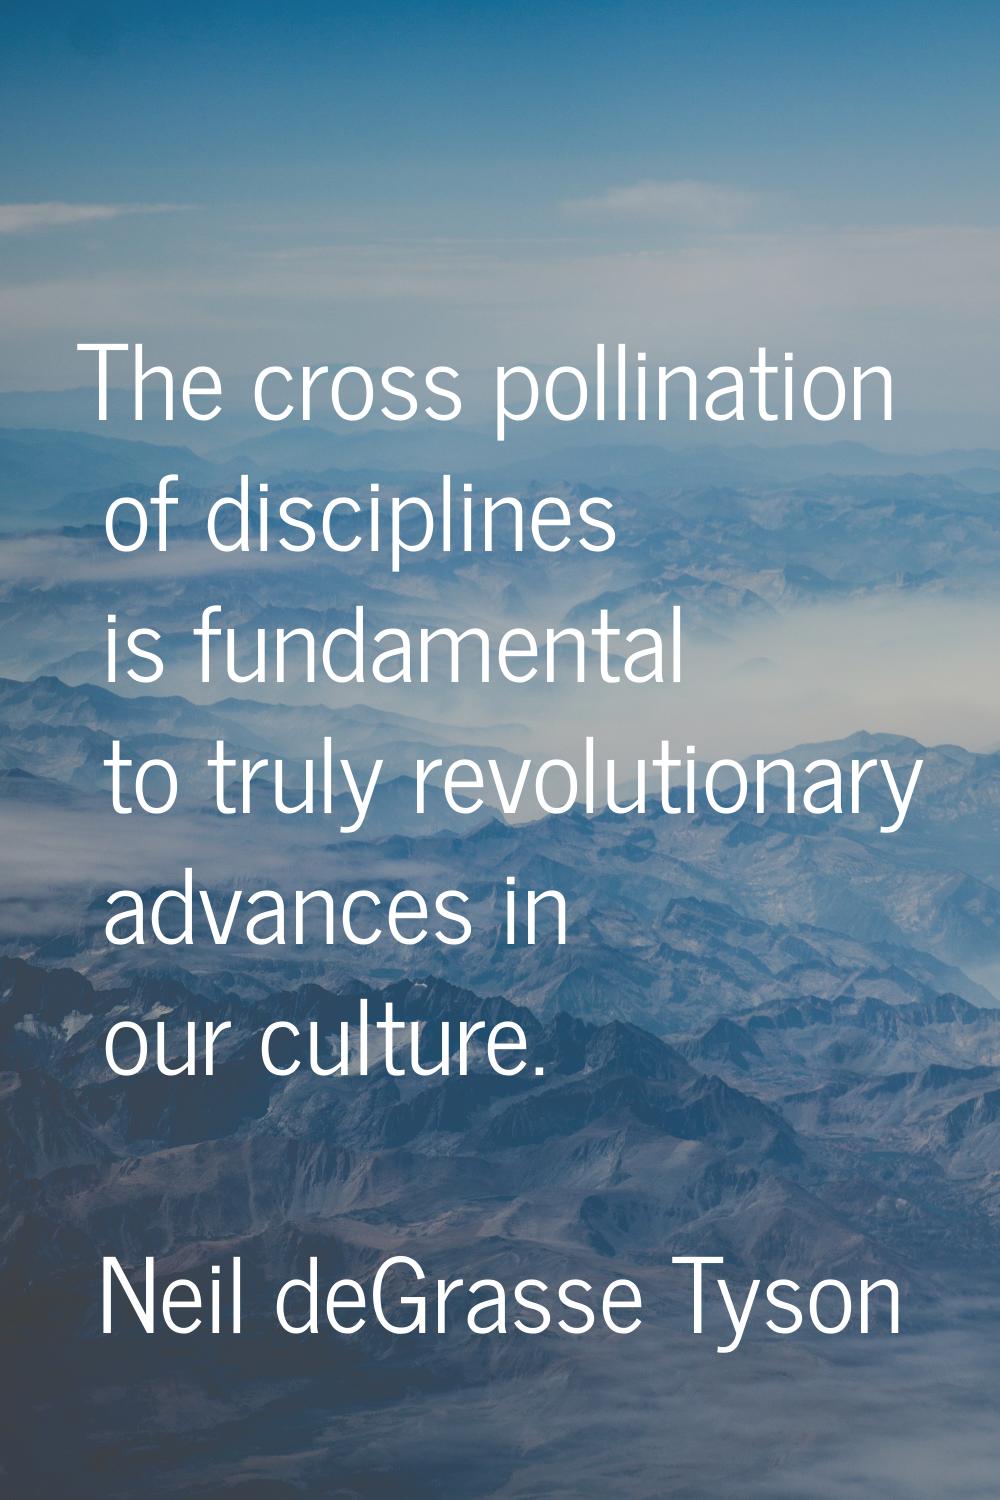 The cross pollination of disciplines is fundamental to truly revolutionary advances in our culture.